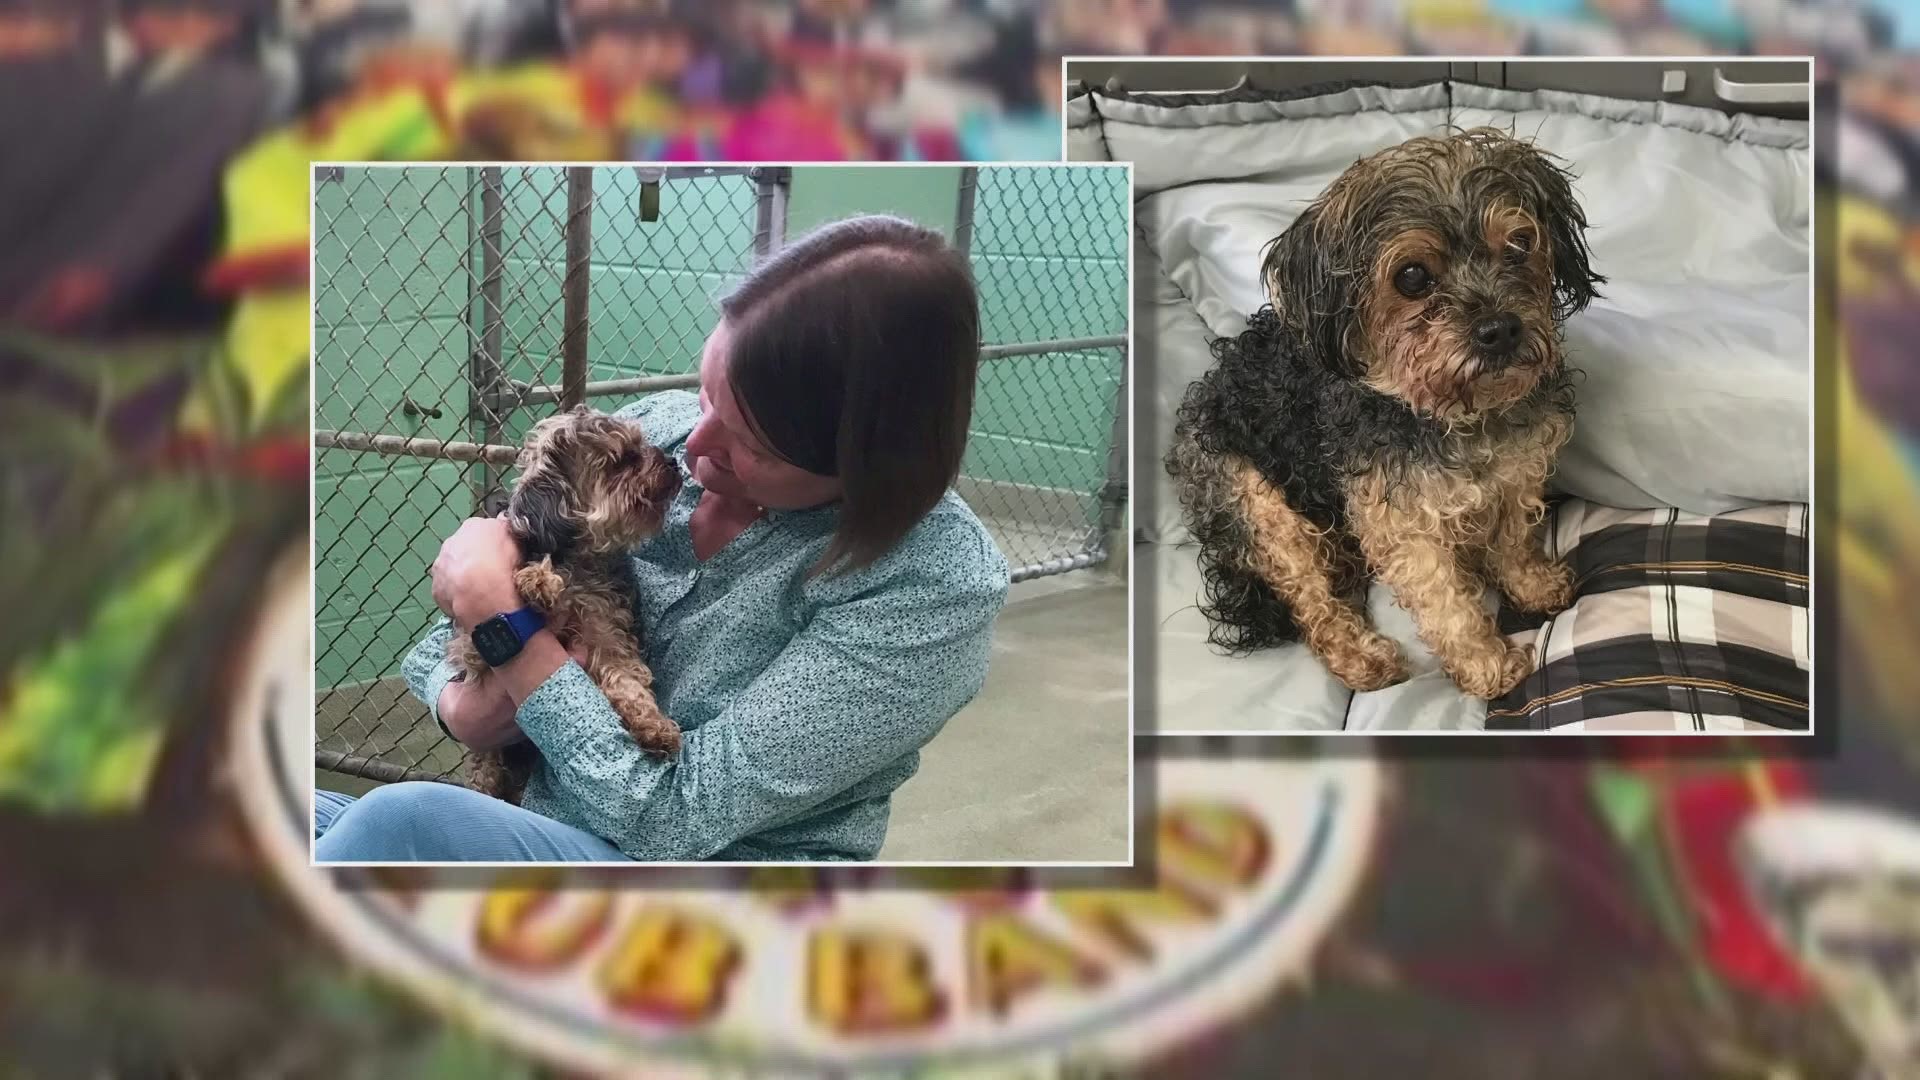 In 2014, Sgt. Pepper, a Yorkie mid dog, was stolen in Florida. In June 2021, the little dog was found in Charlotte, Mi., thanks to it having been microchipped.